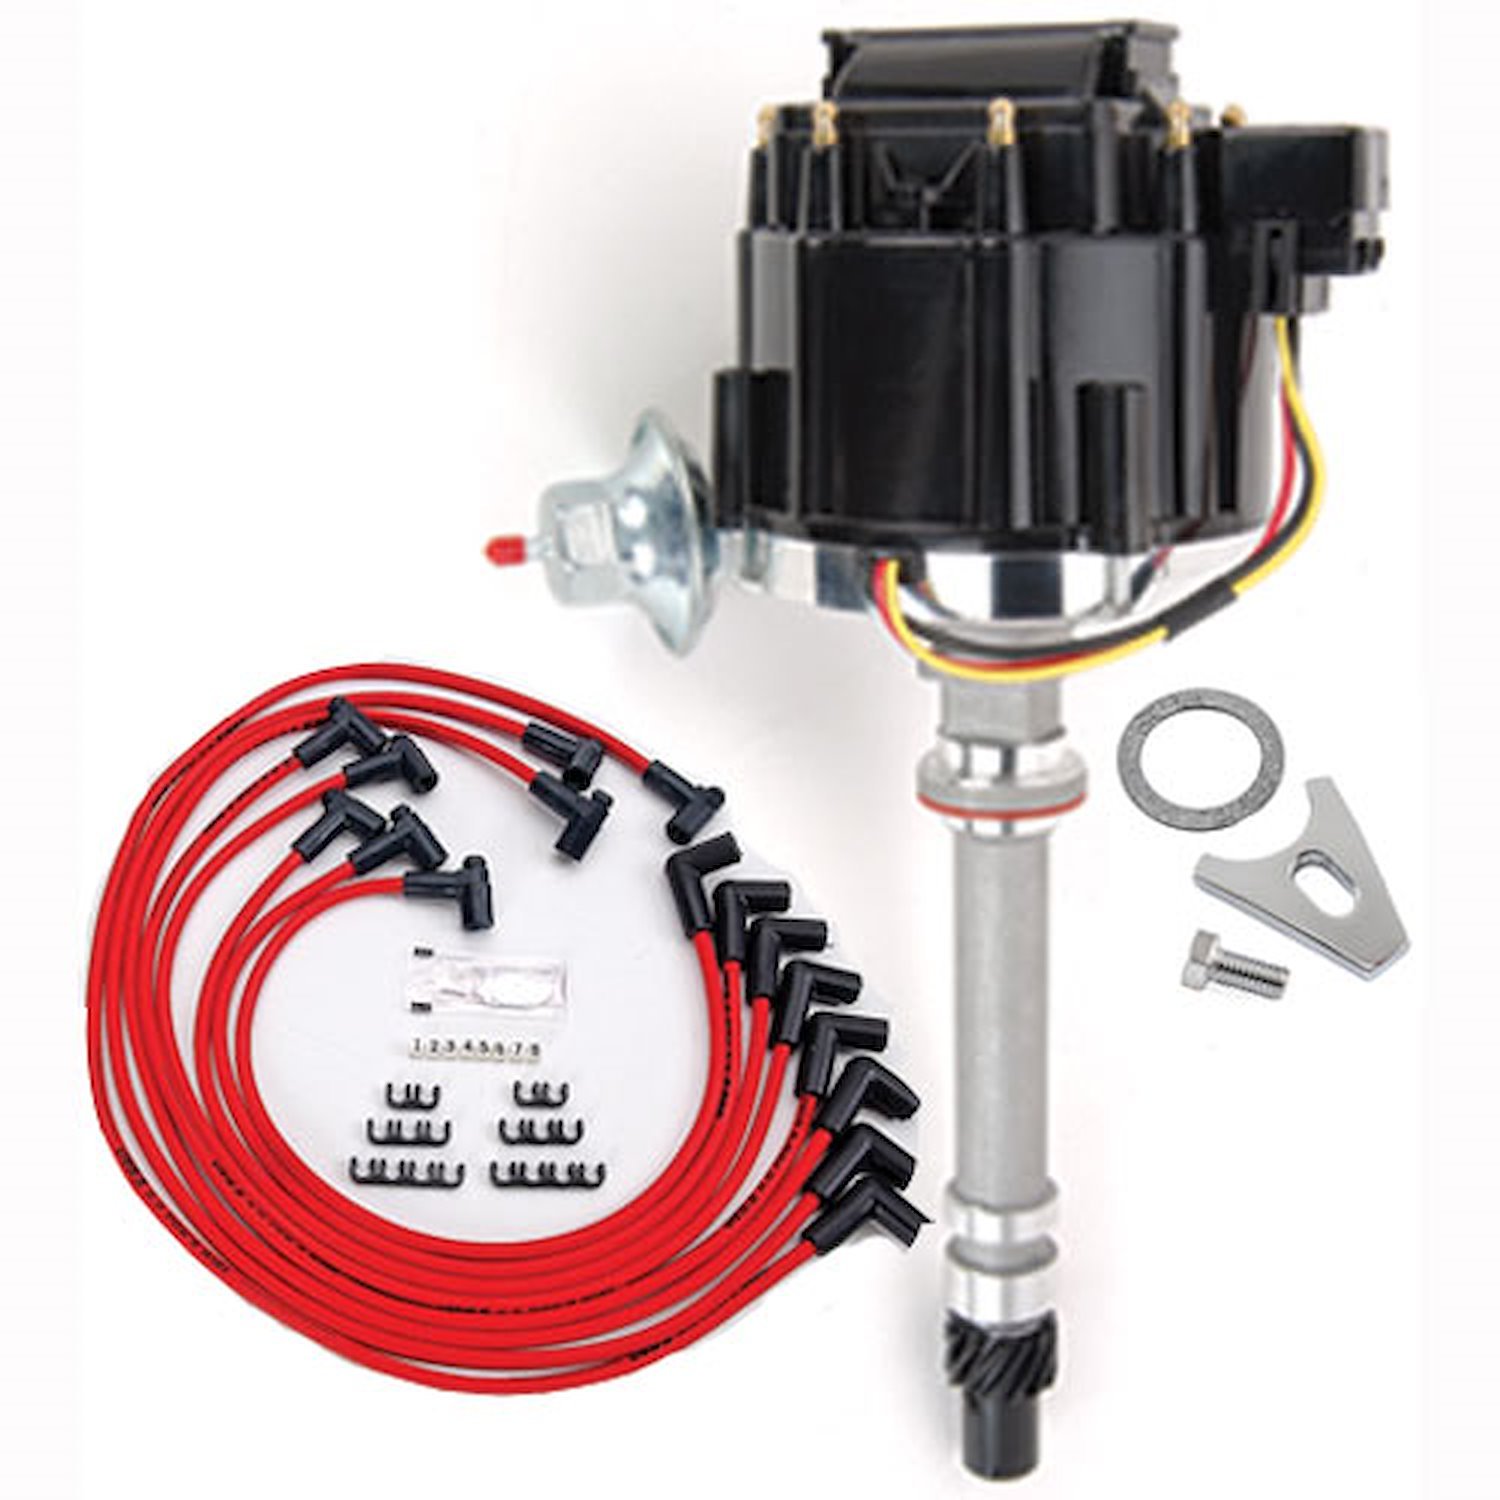 HEI Distributor Kit For Small Block Chevy